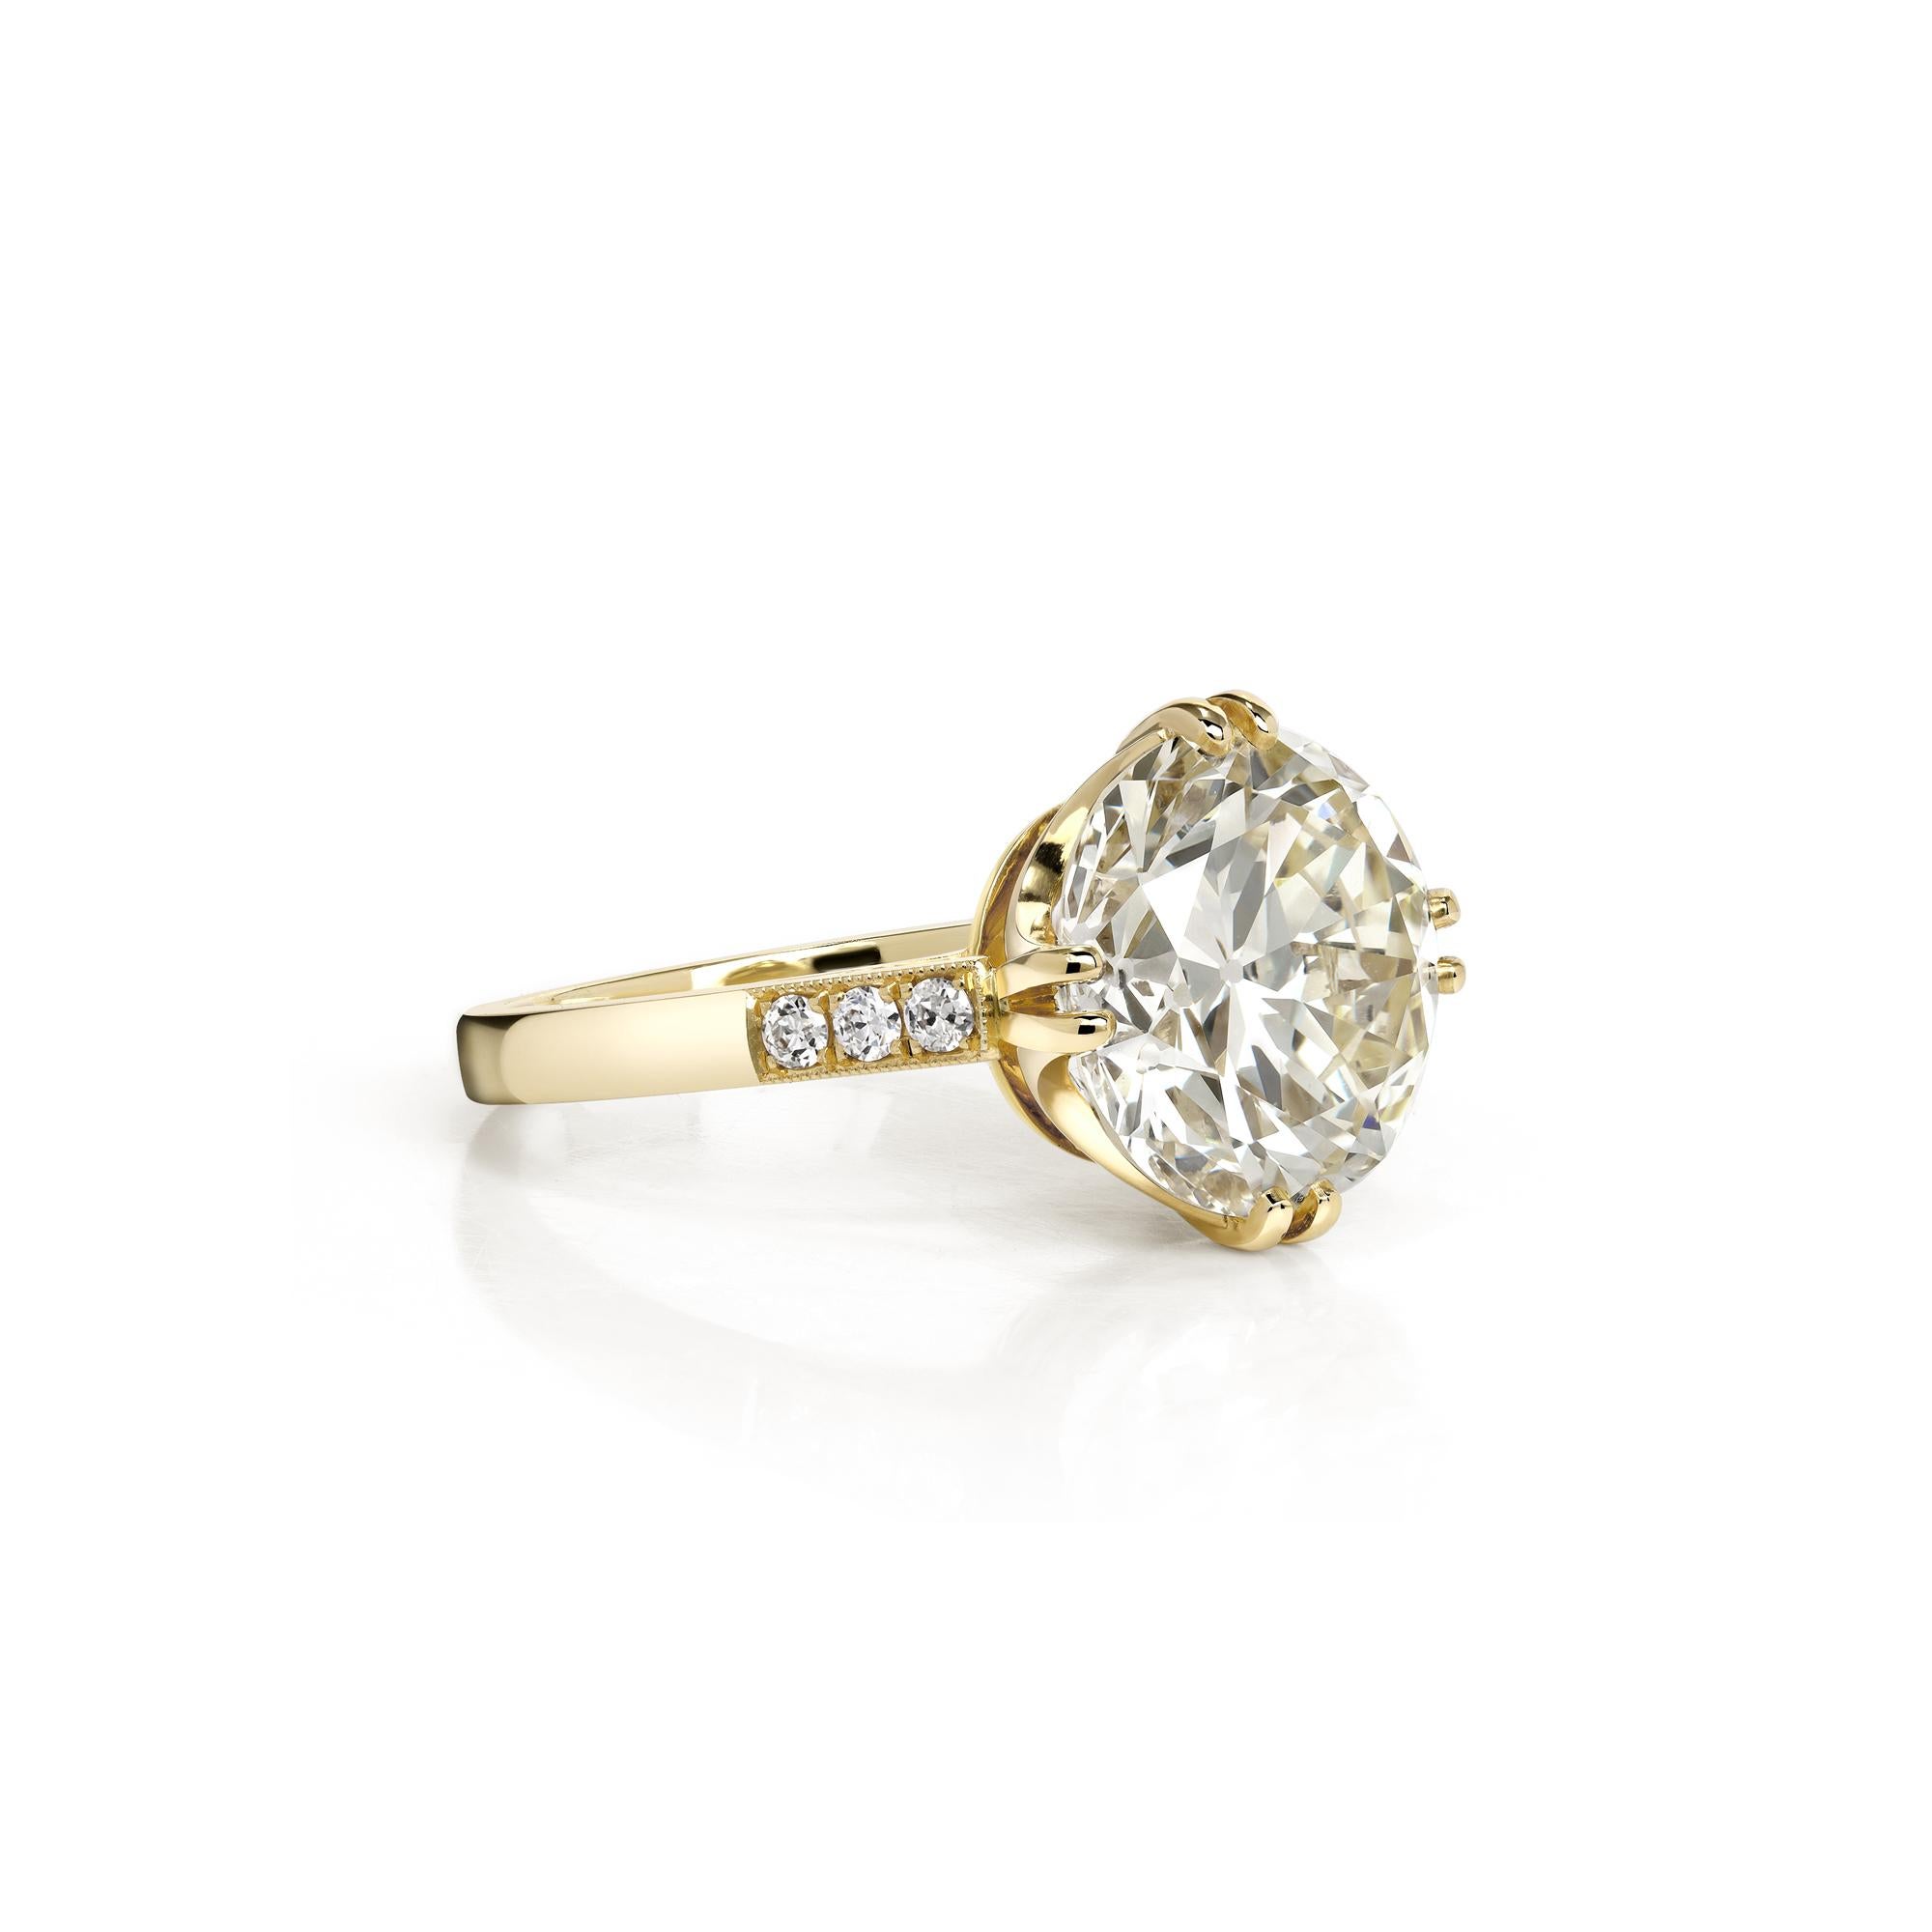 3.33ct M/VS2 GIA certified old European cut diamond with 0.09ctw old European cut accent diamonds prong set in a handcrafted 18K yellow gold mounting.